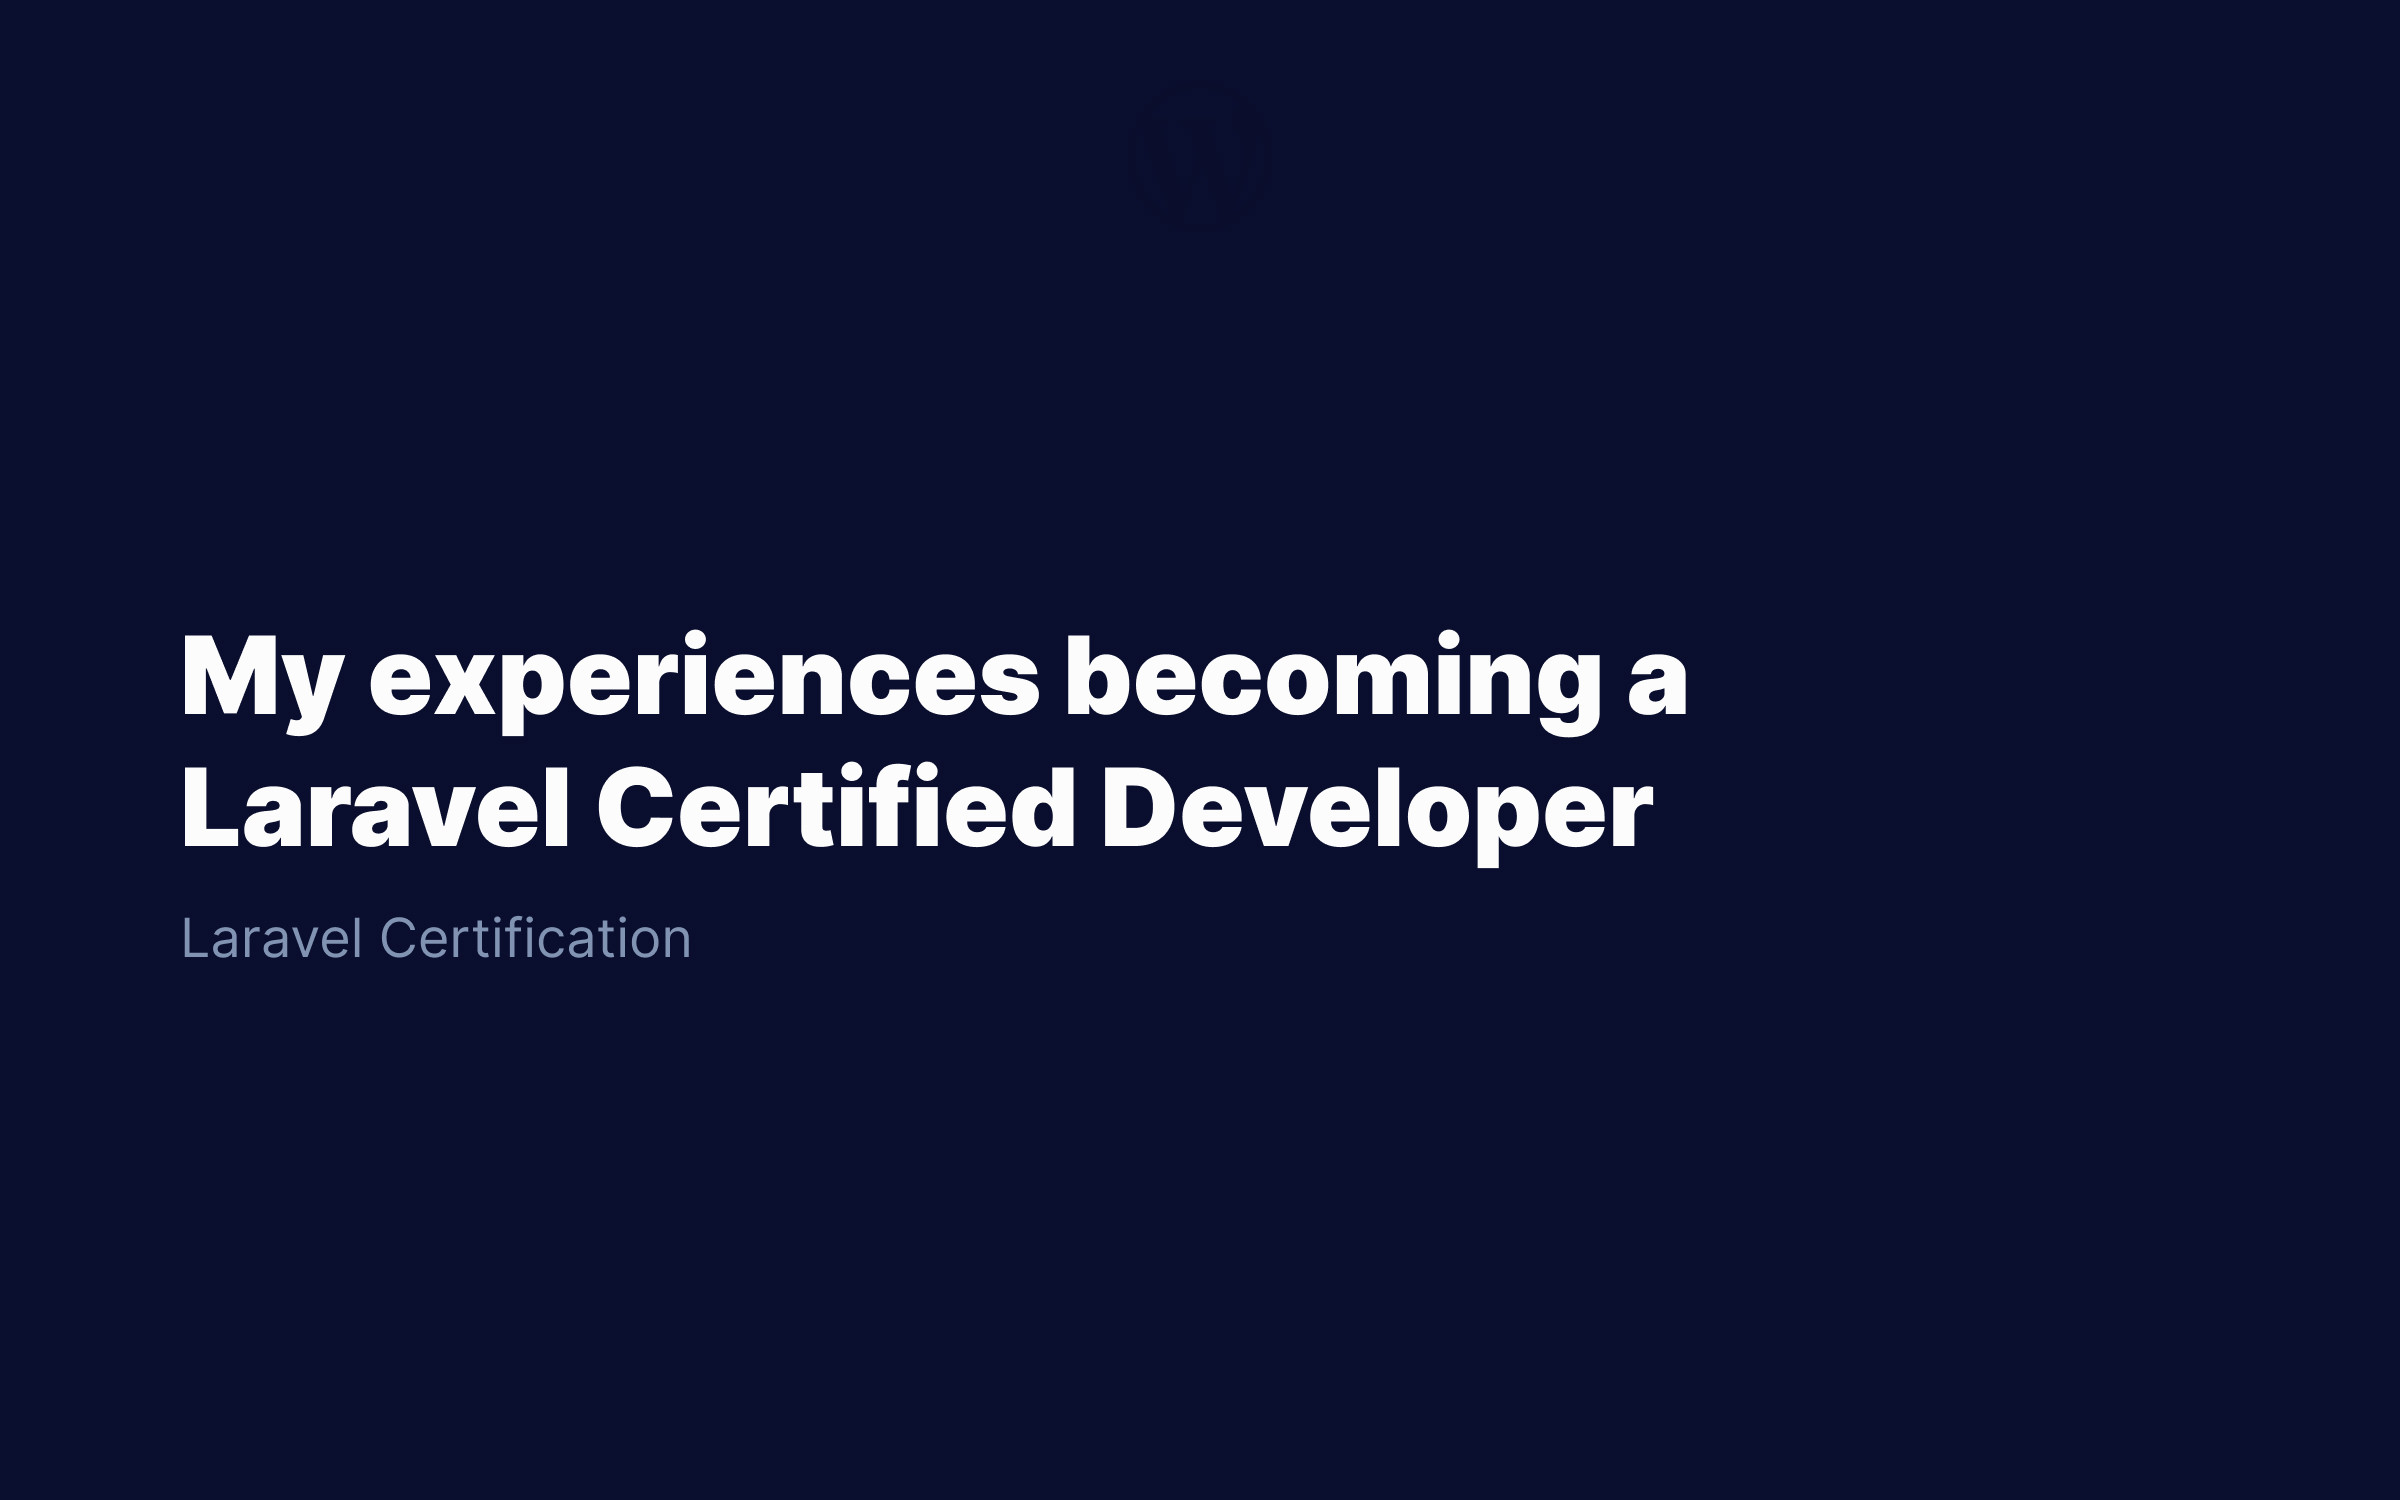 My experience becoming a Laravel Certified Developer